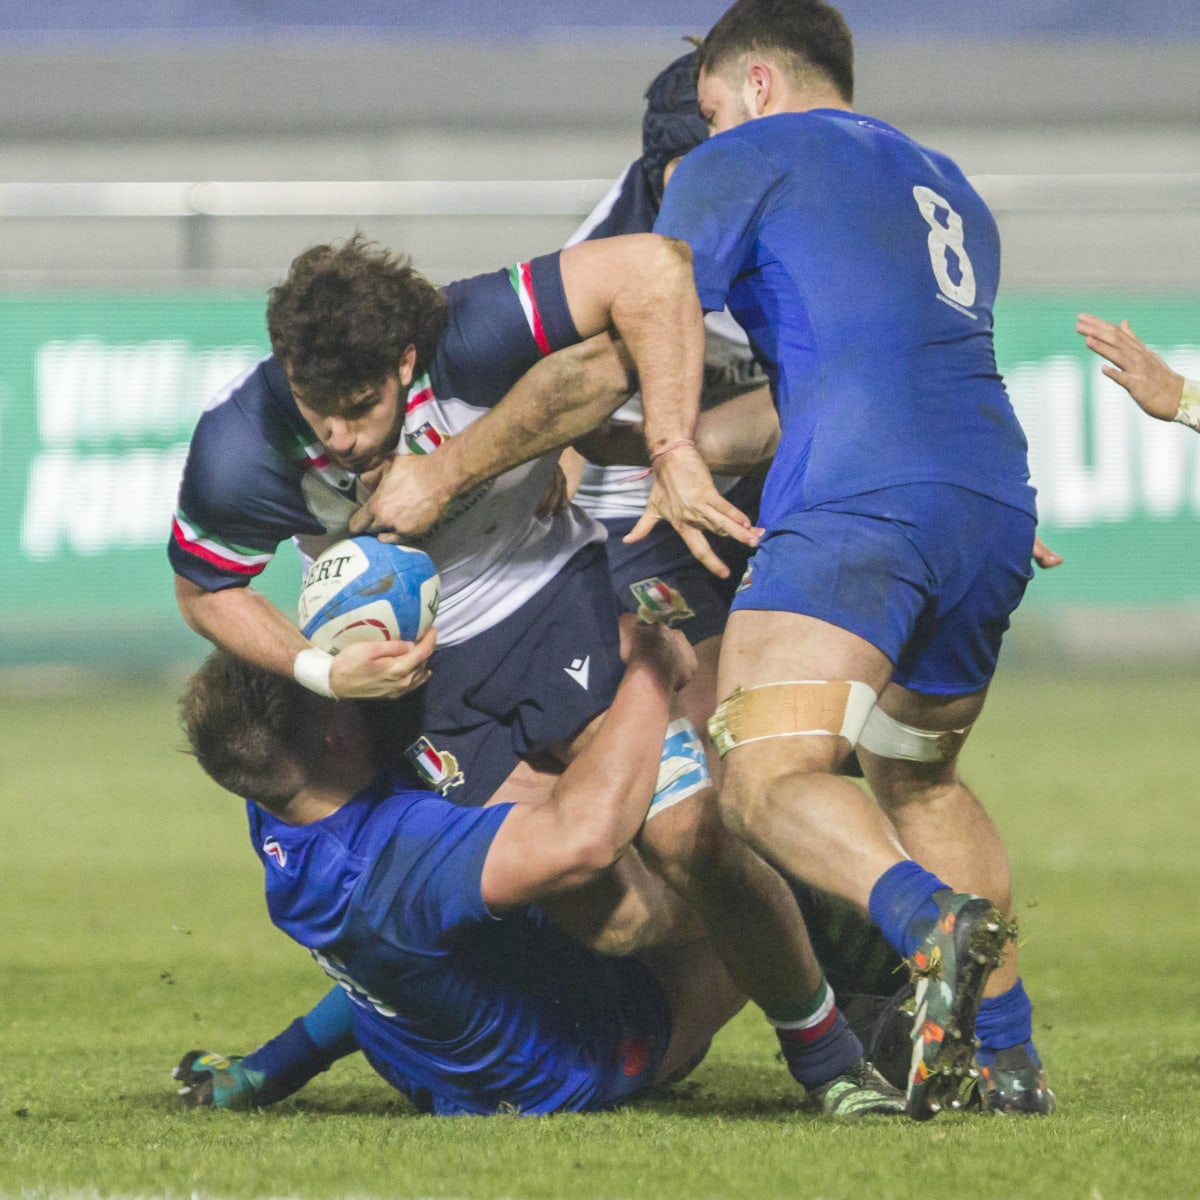 Watch Old Glory DC vs Toronto Arrows Stream Major League Rugby live - How to Watch and Stream Major League and College Sports